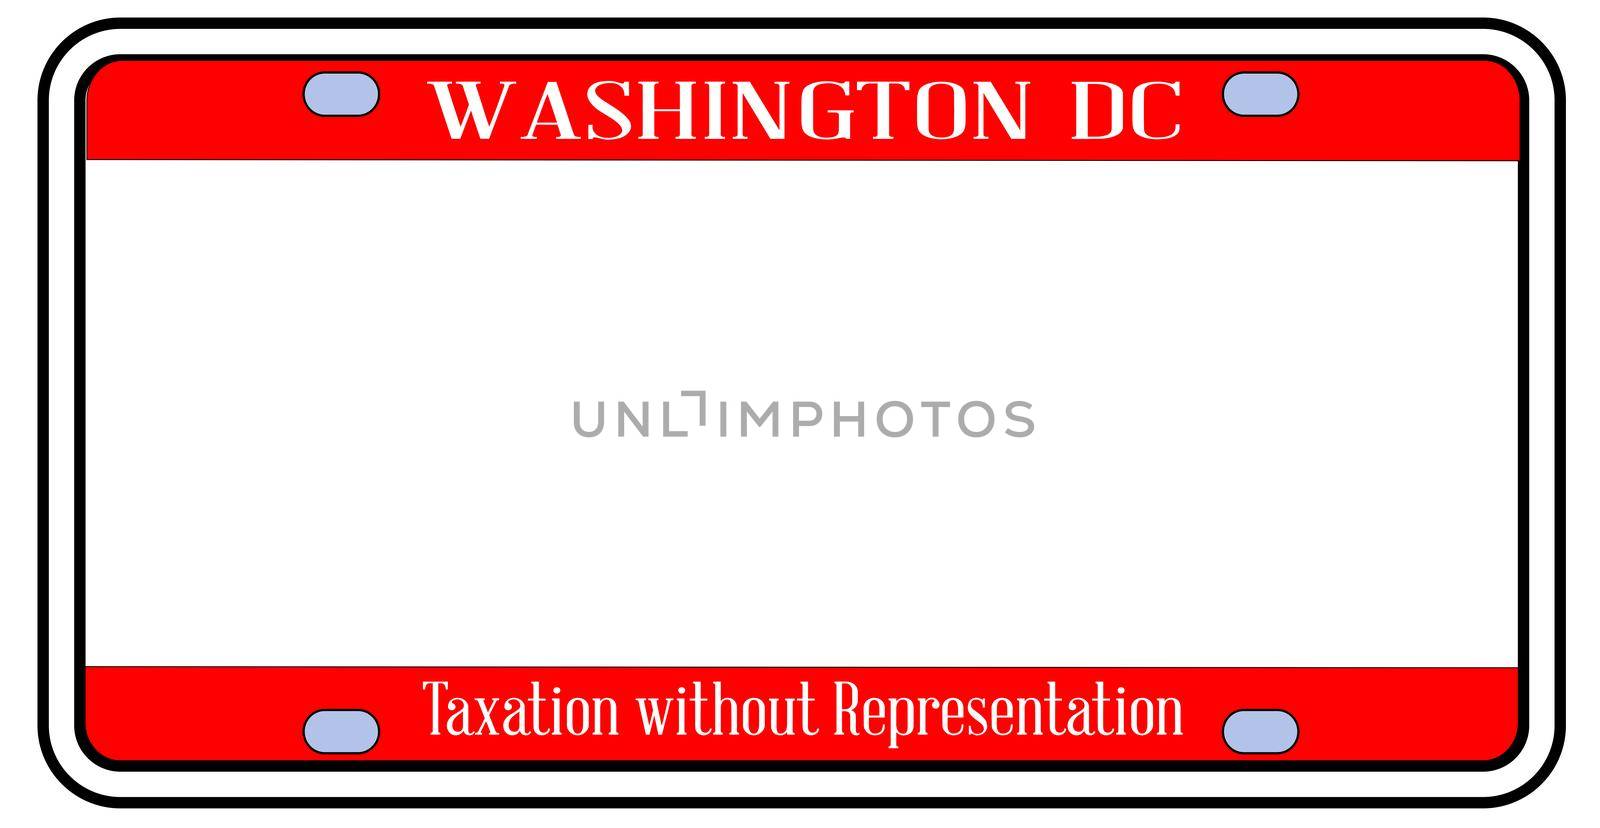 Blank Washington DC state license plate in the colors of the state flag over a white background